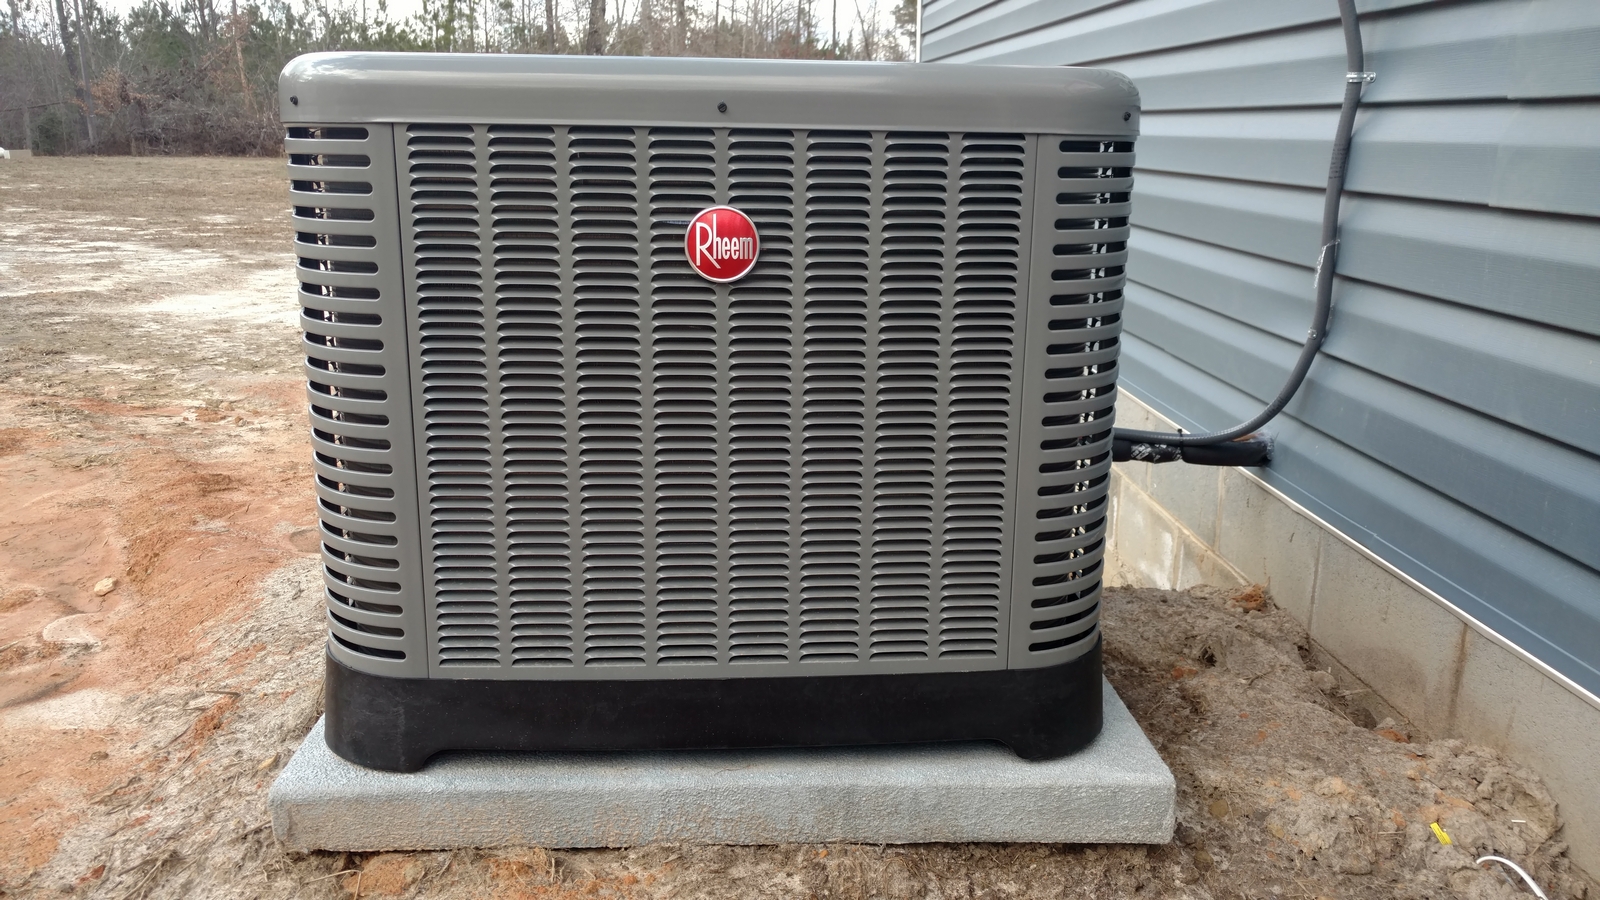 At Taylor Heating and Air, specialize in providing top-quality replacement & installation services for all heating & air conditioning needs.